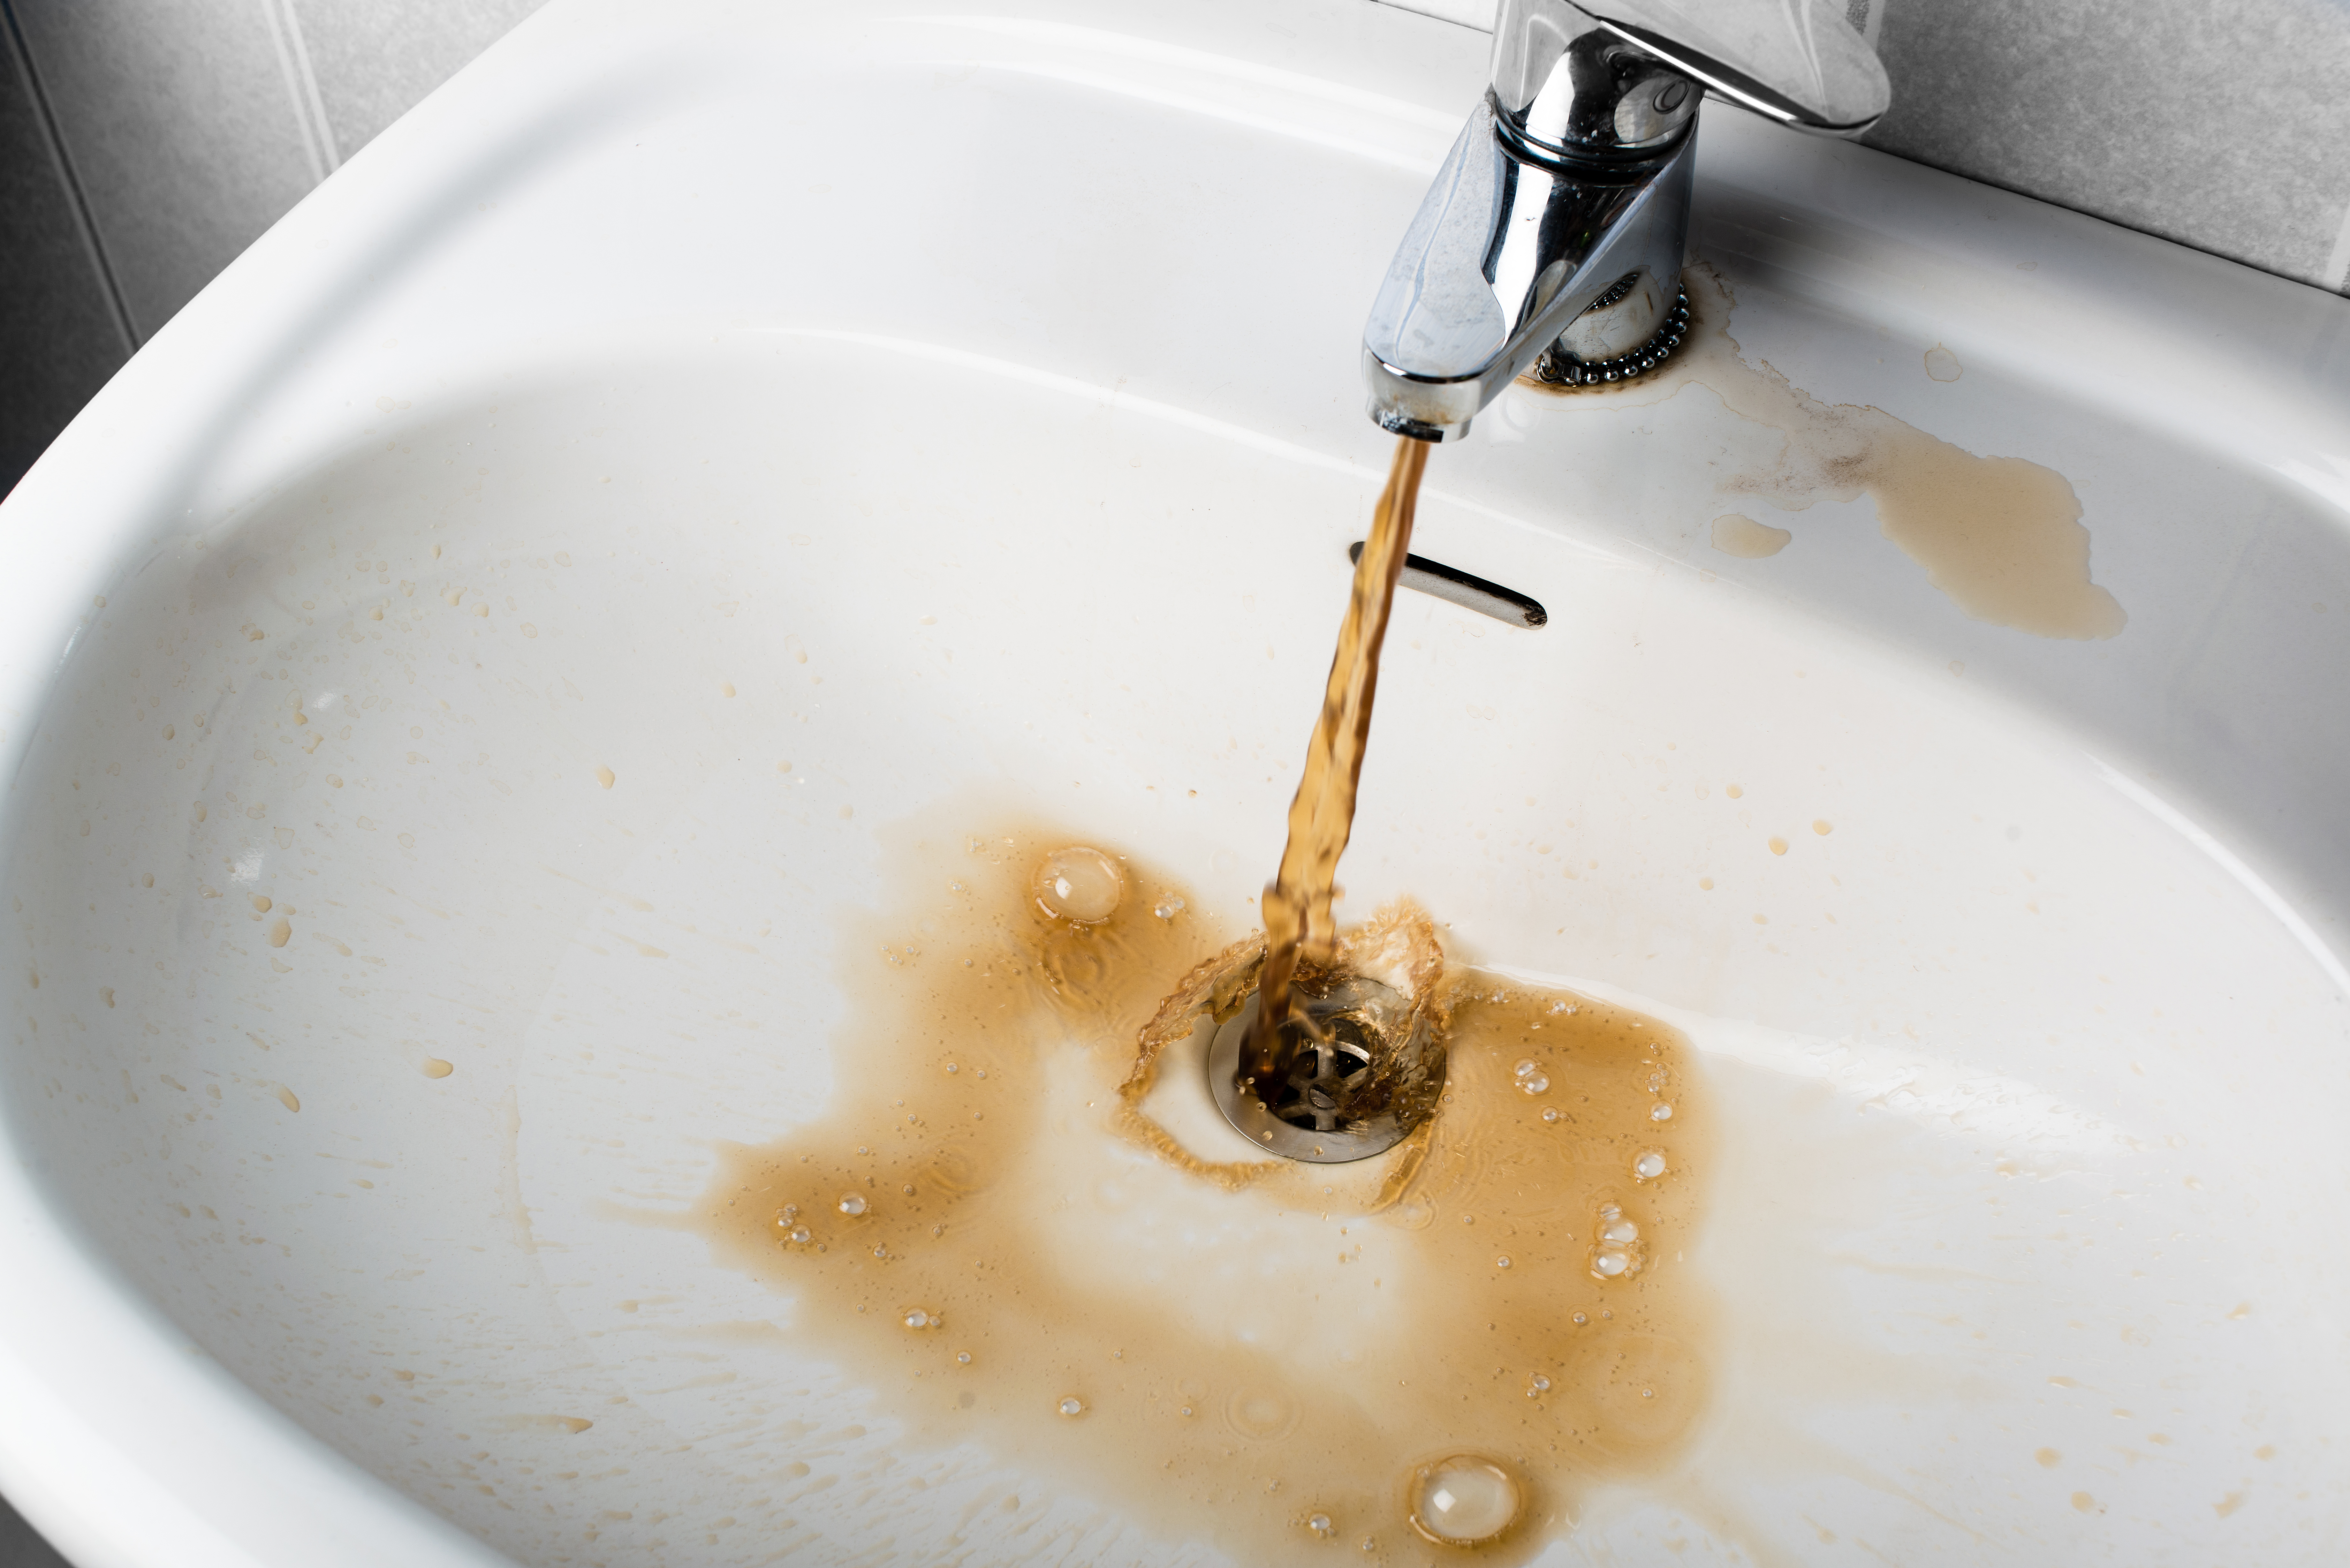 Brown water flows out of a leaky faucet into a white sink